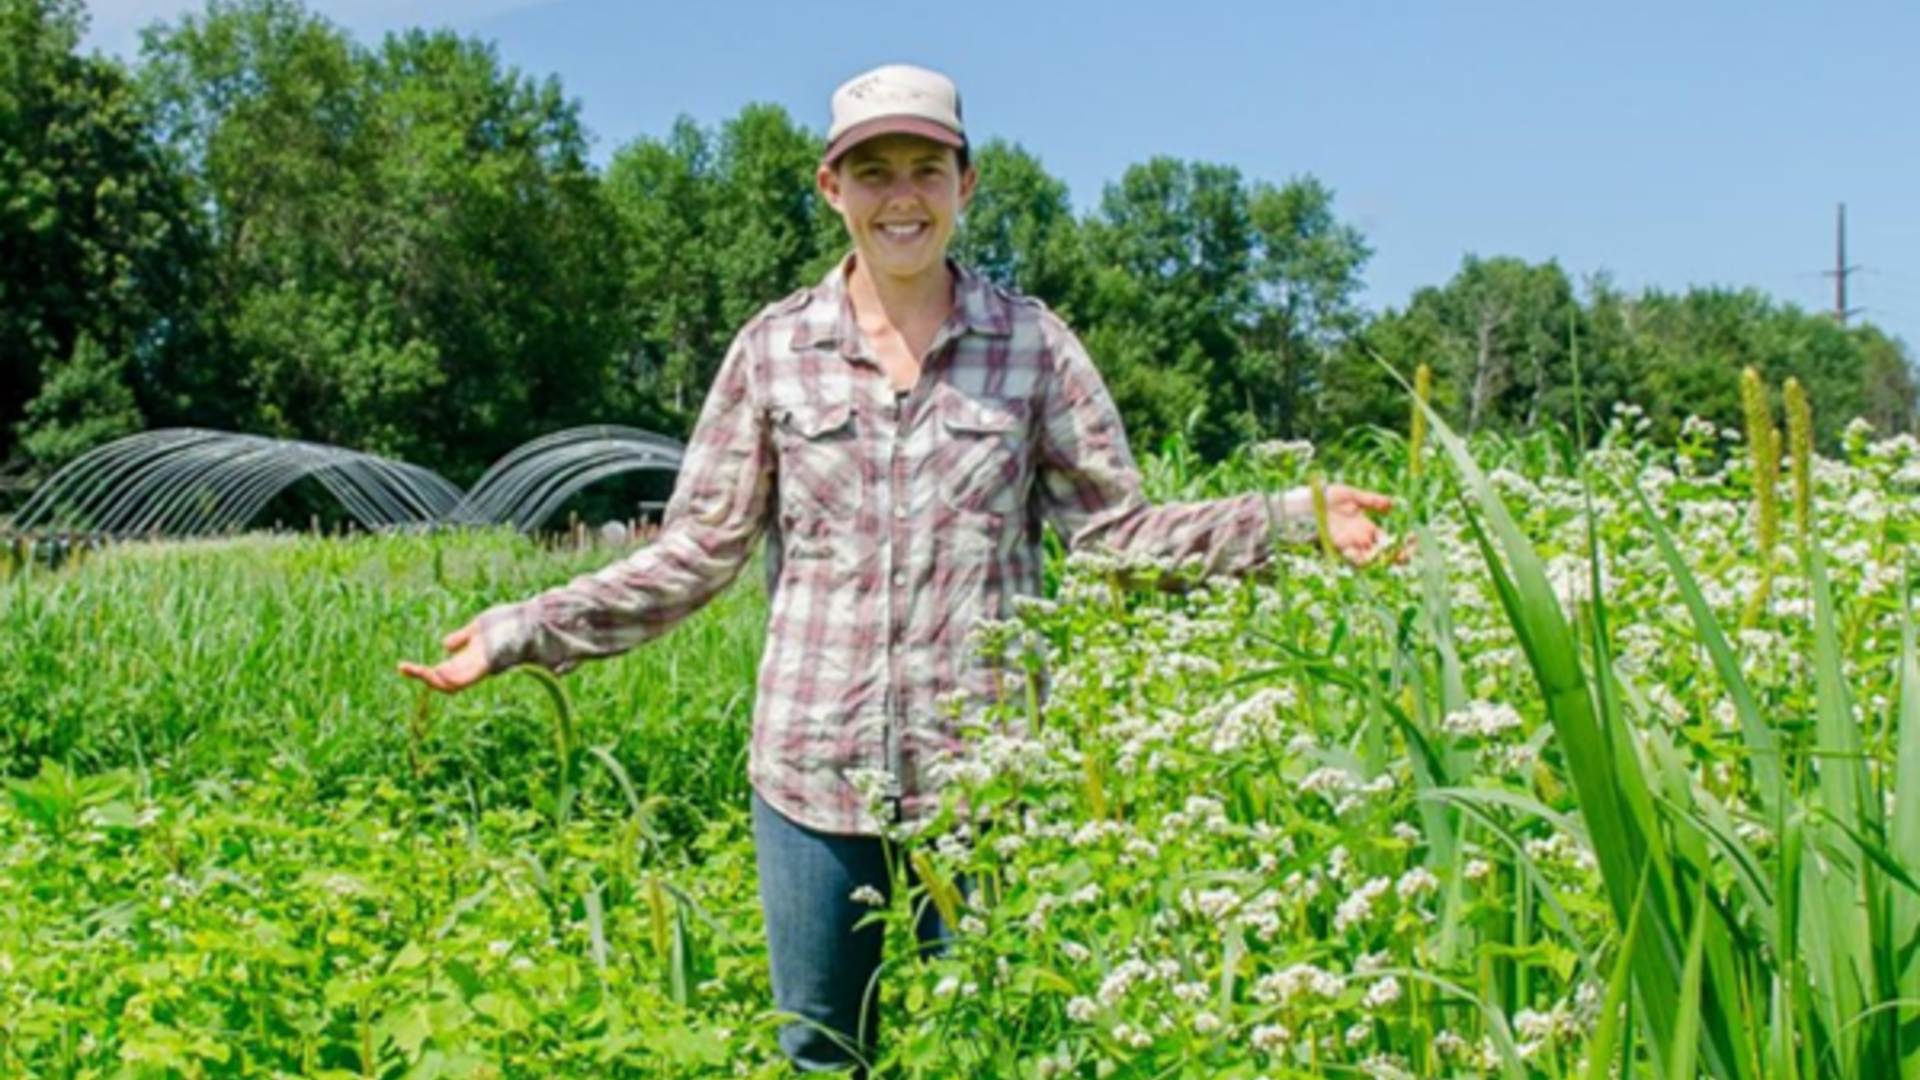 Addressing Cover Crops Over the Winter Months